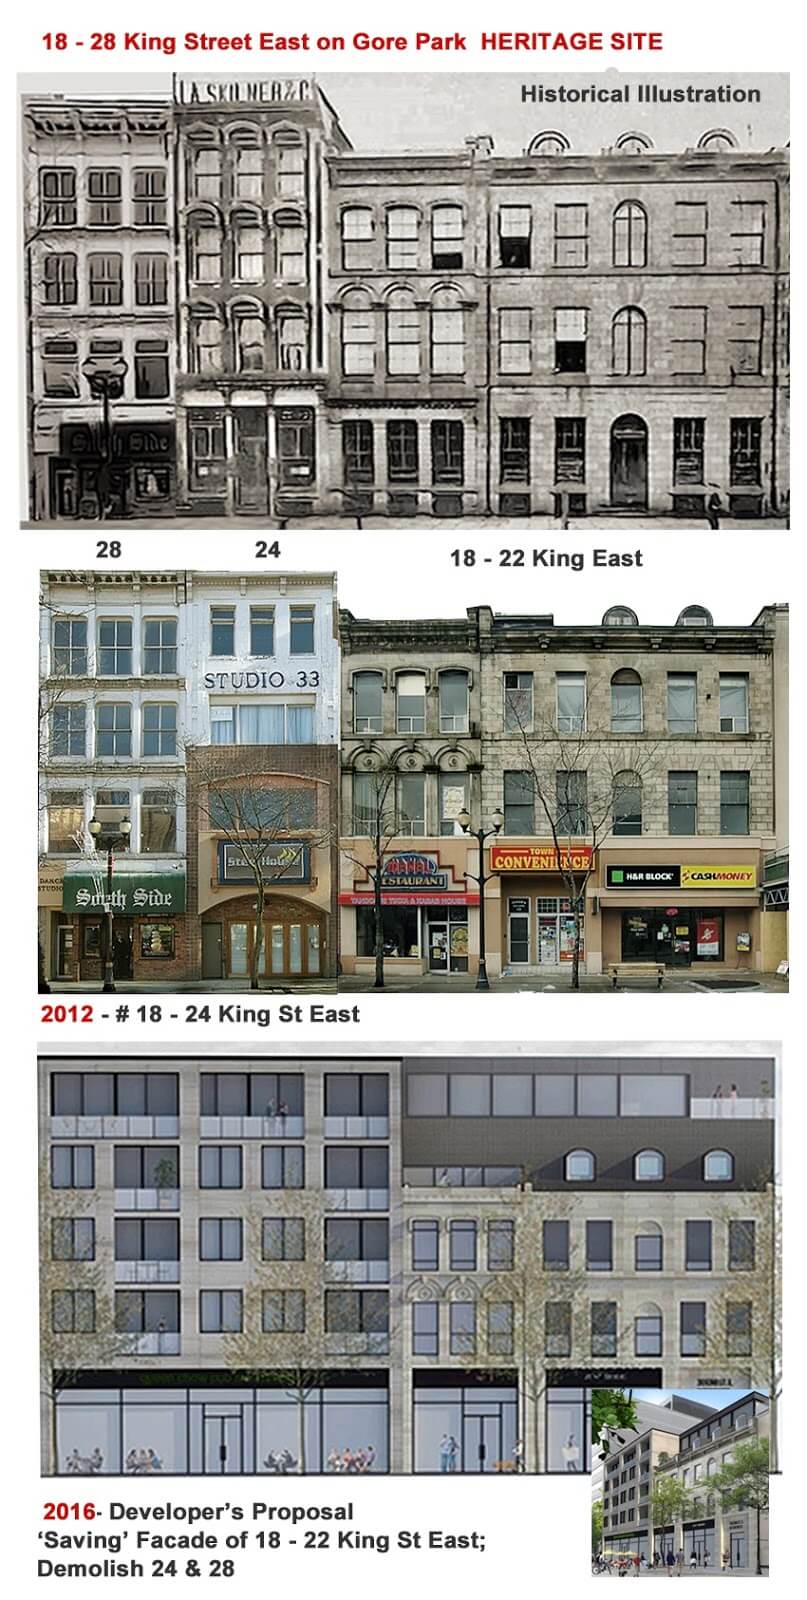 A historic illustration of King Street East, Hamilton facade frontage, existing facade, and developers rendered facade proposal of modern building frontages